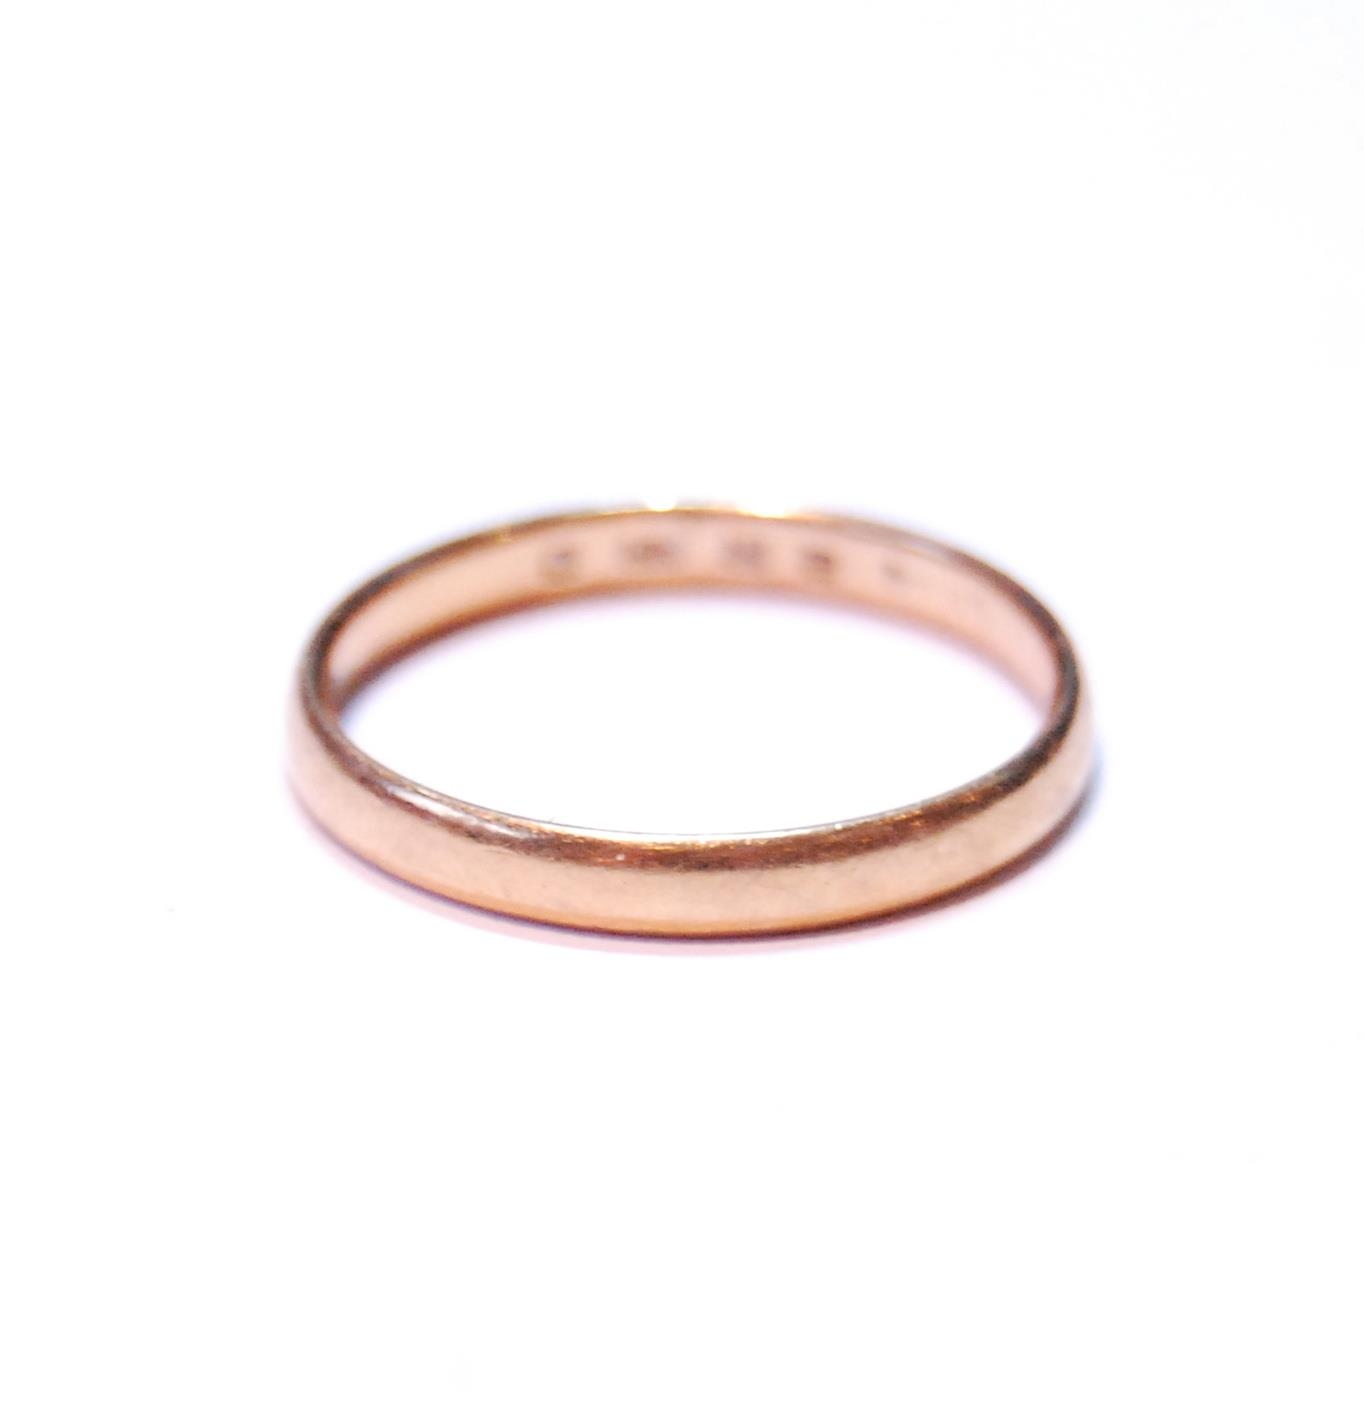 22ct gold band ring, 1931, size K, 1.9g.